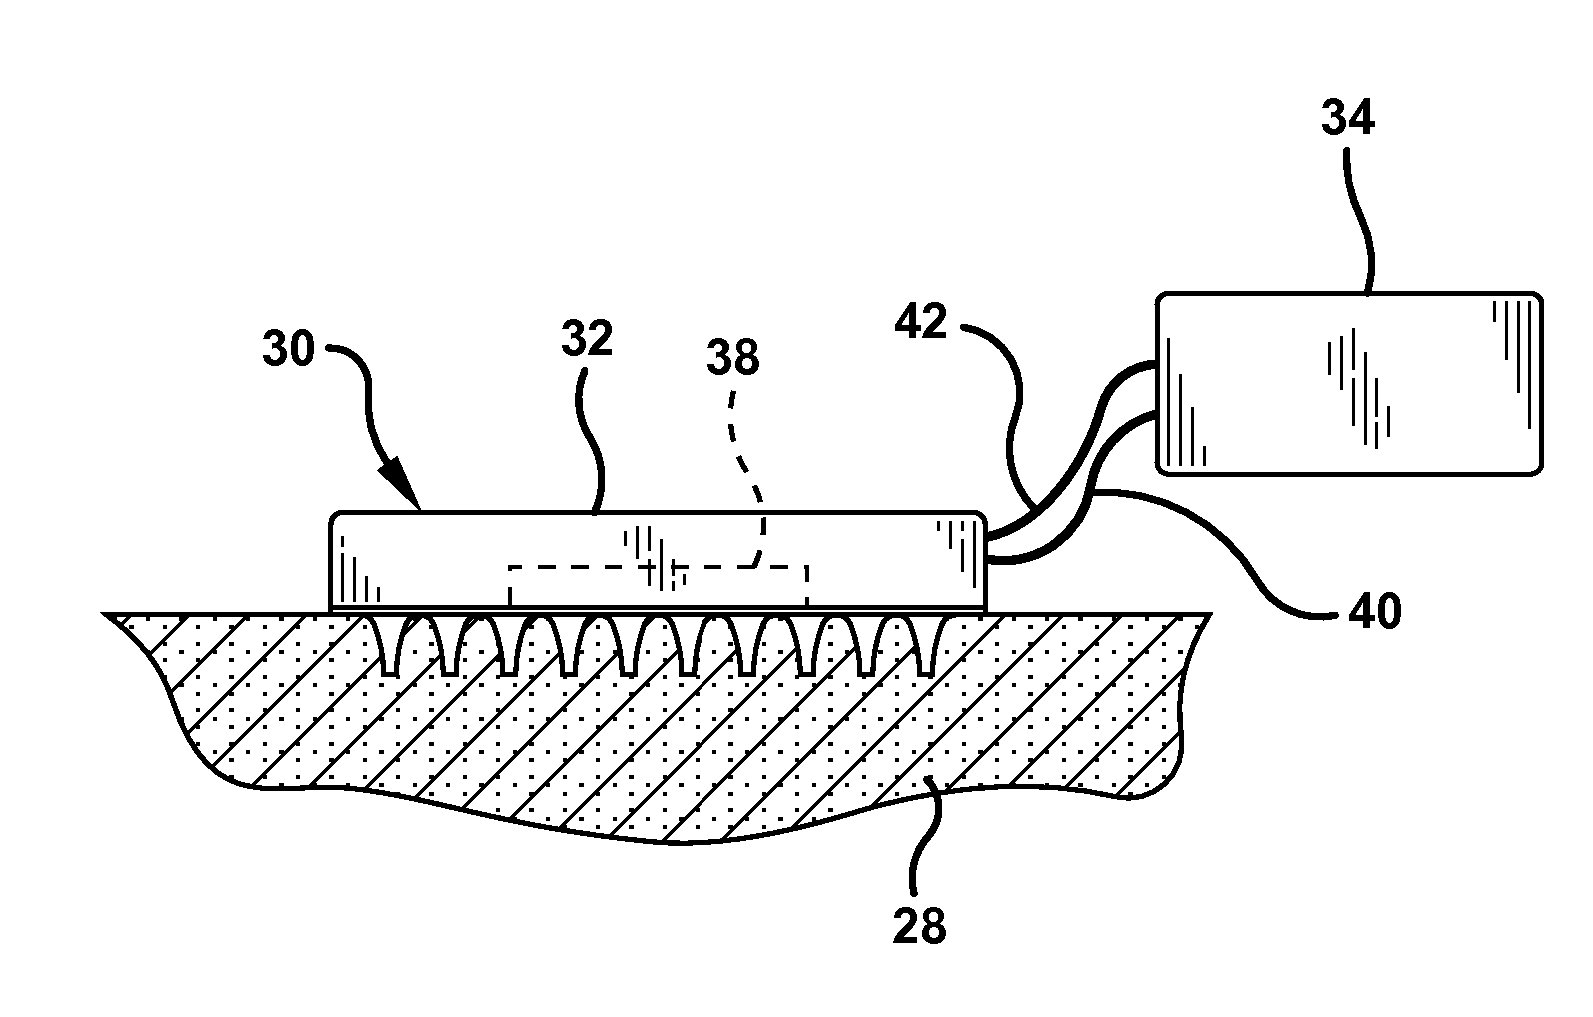 Method and device for abrading skin